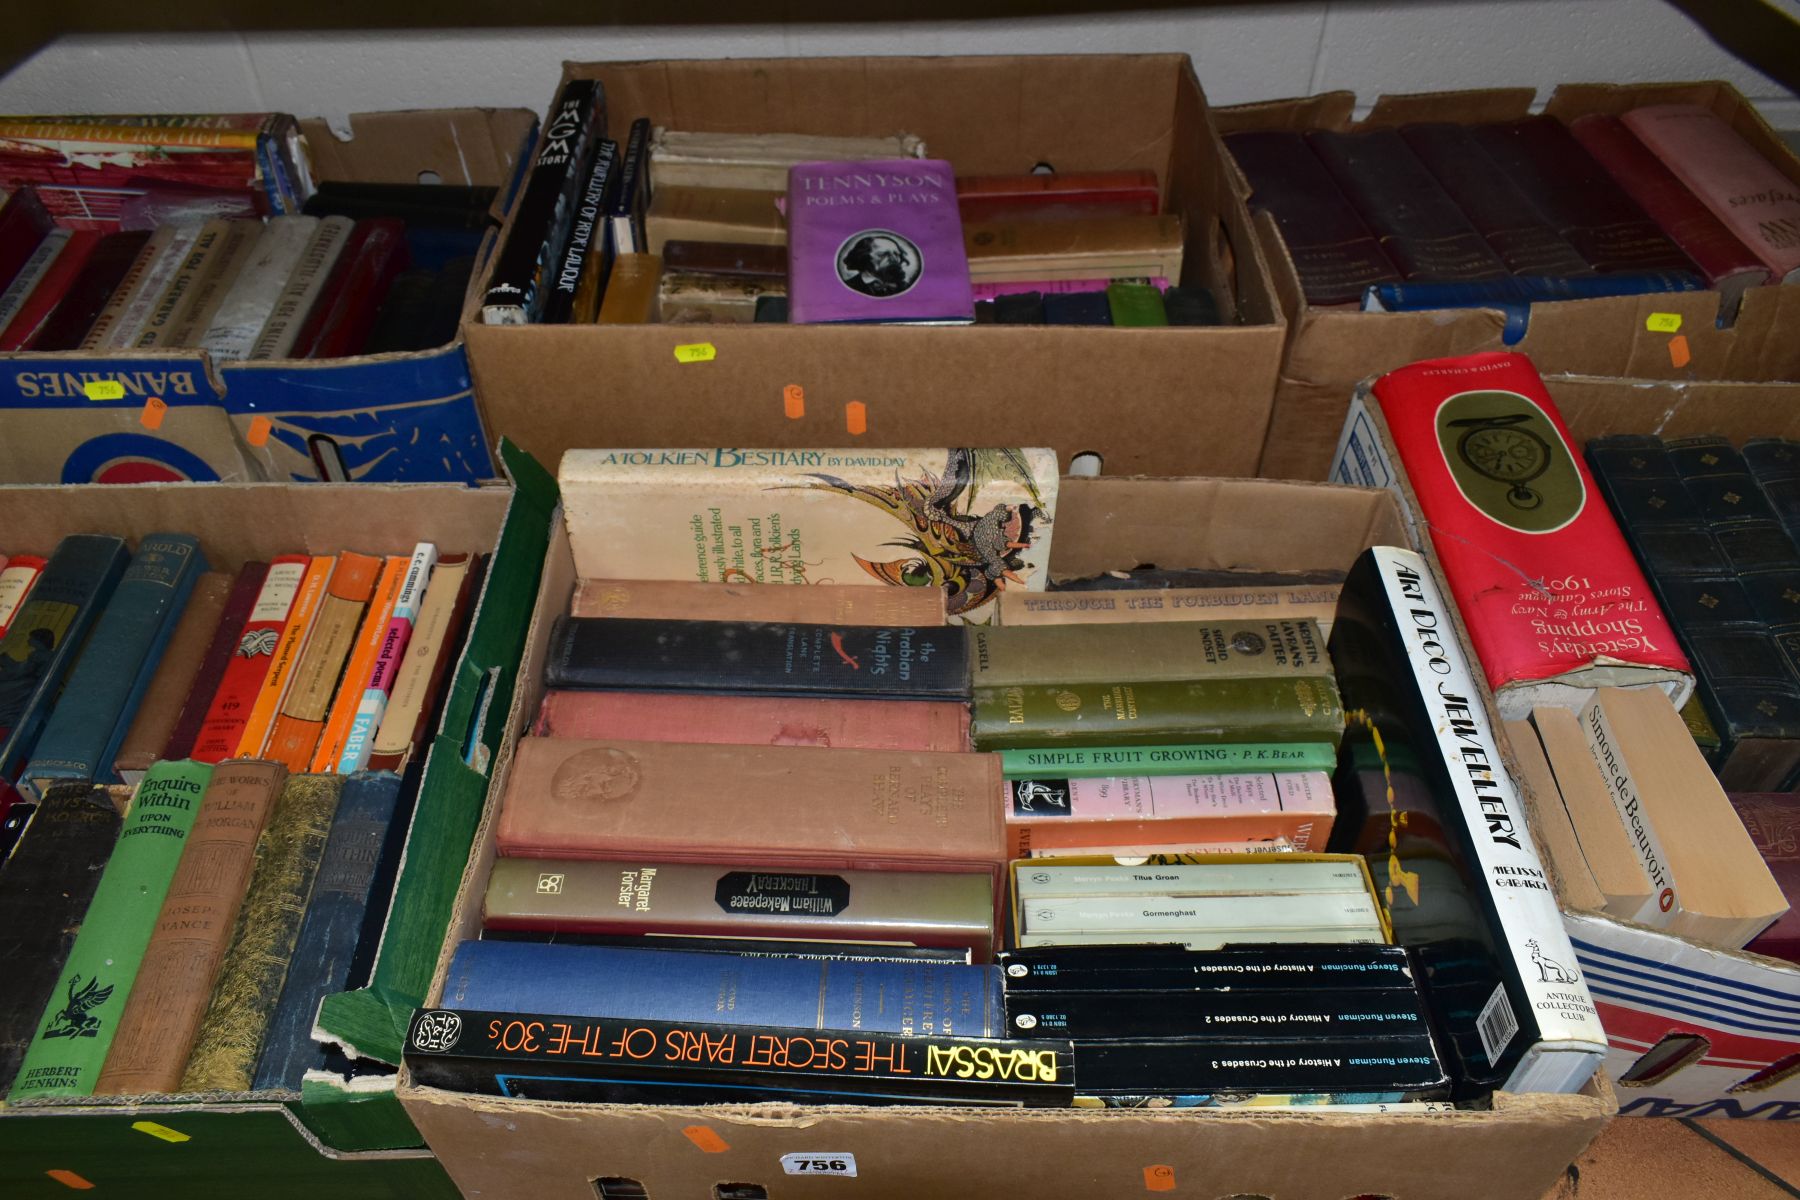 BOOKS, six boxes containing approximately one hundred and forty titles including ten volumes of